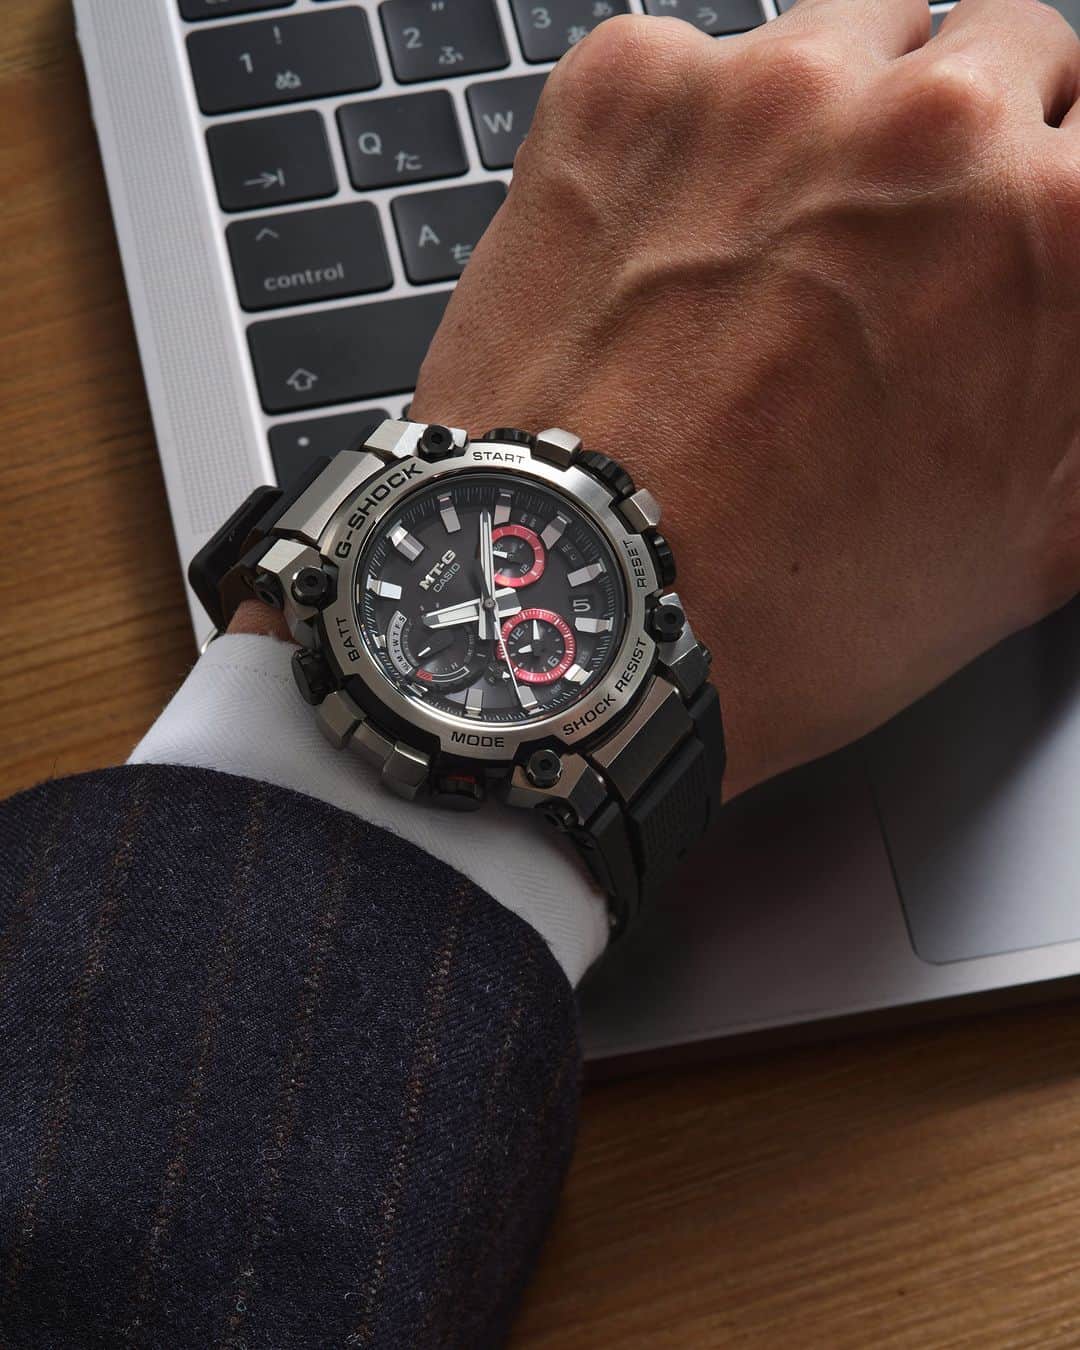 G-SHOCKのインスタグラム：「MTG-B3000  ワンプッシュでバンドの付け替えが可能なMTG-B3000。オンオフ選ばず着用できるのが嬉しいポイント。  The MTG-B3000 allows the band to be changed with a single push. Excellent for both work and off-duty use.  MTG-B3000-1AJF  #g_shock #mt_g #ビジネス時計 #madeinjapan」